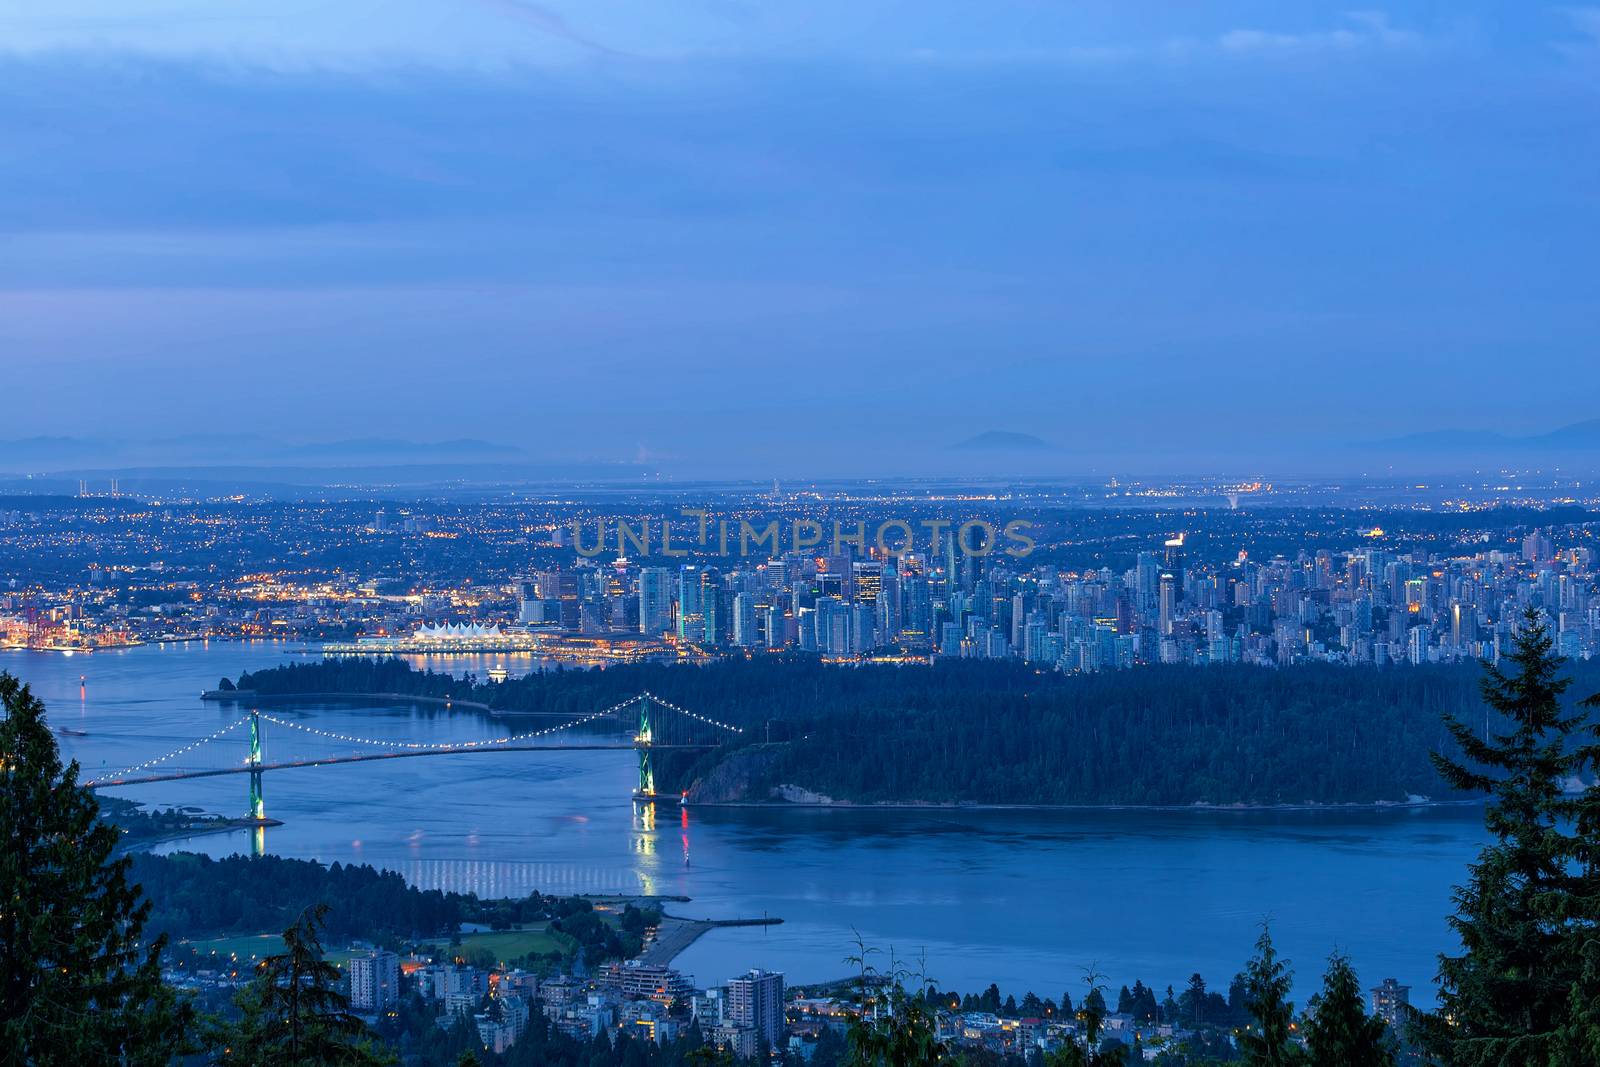 Vancouver British Columbia Canada cityscape by Stanley Park Lions Gate Bridge during early morning dawn blue hour 